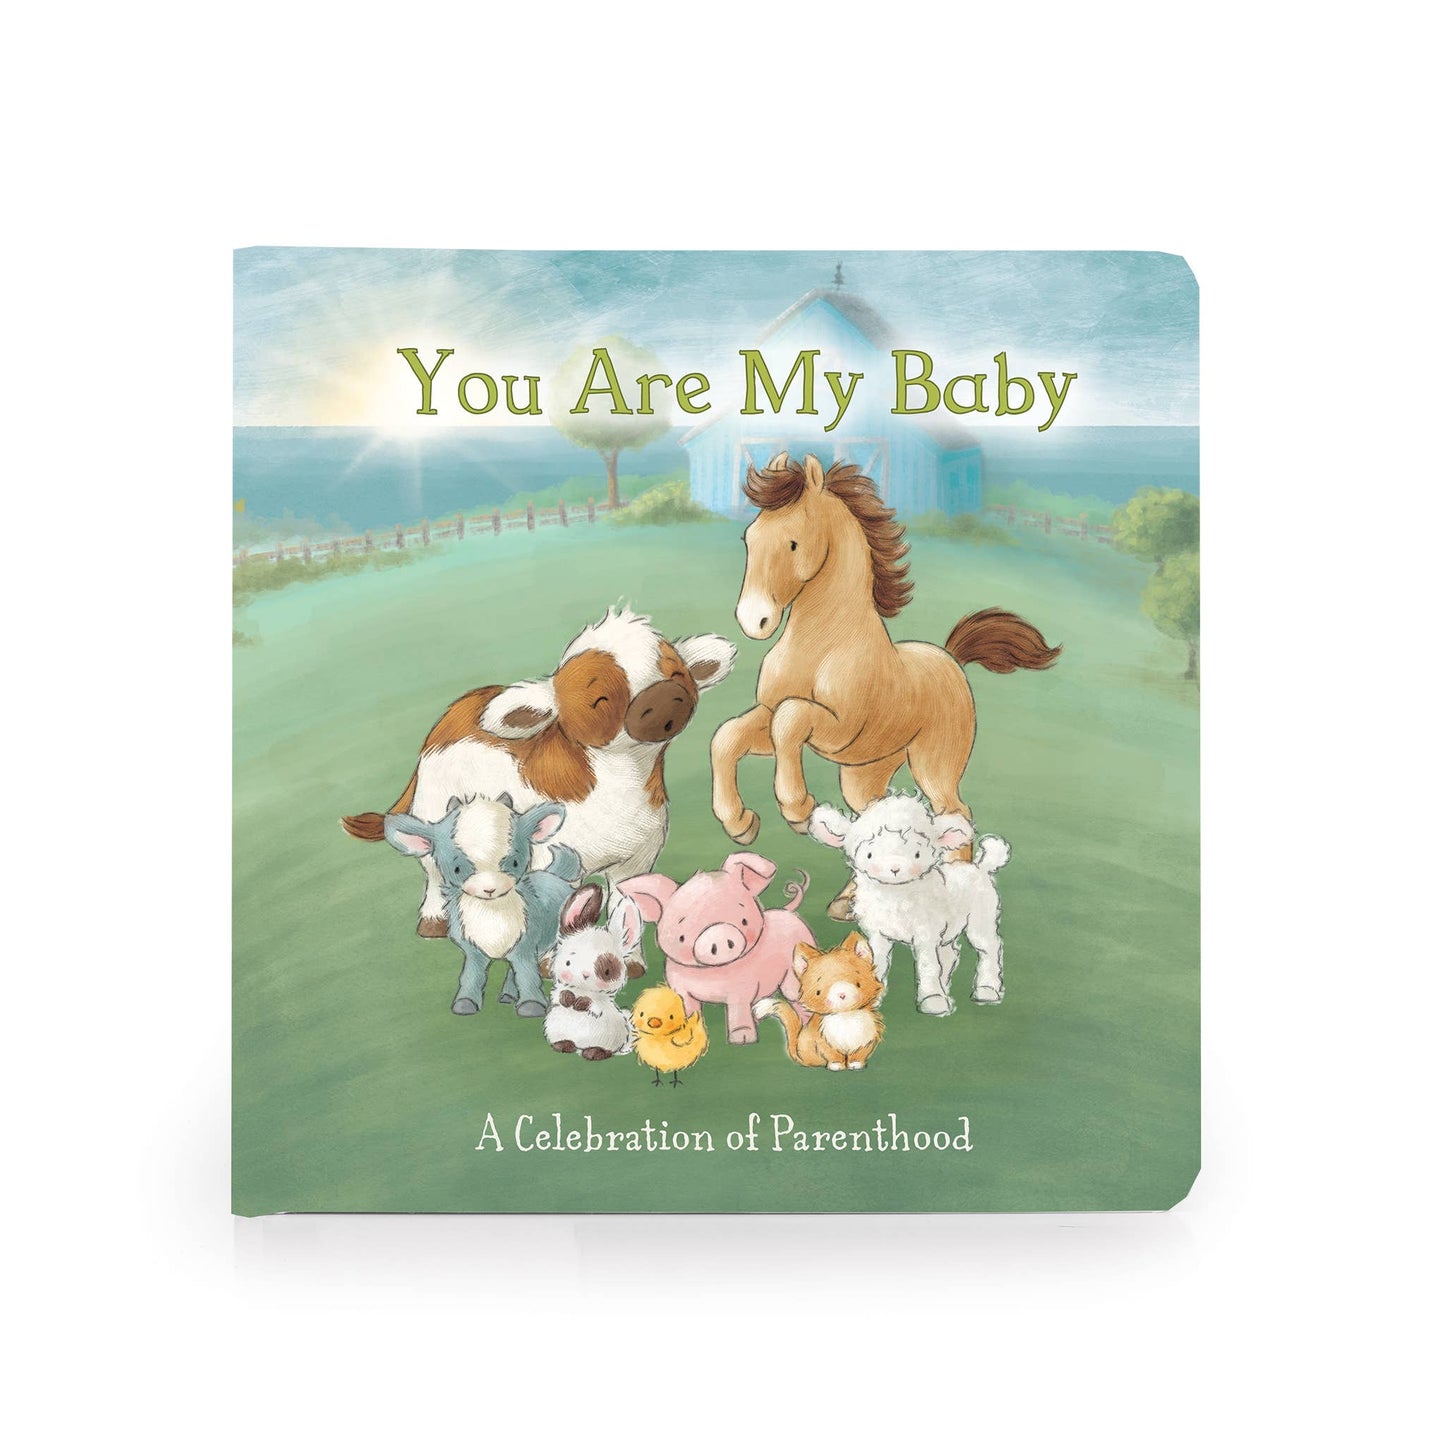 Bunnies By the Bay - You Are My Baby Board Book